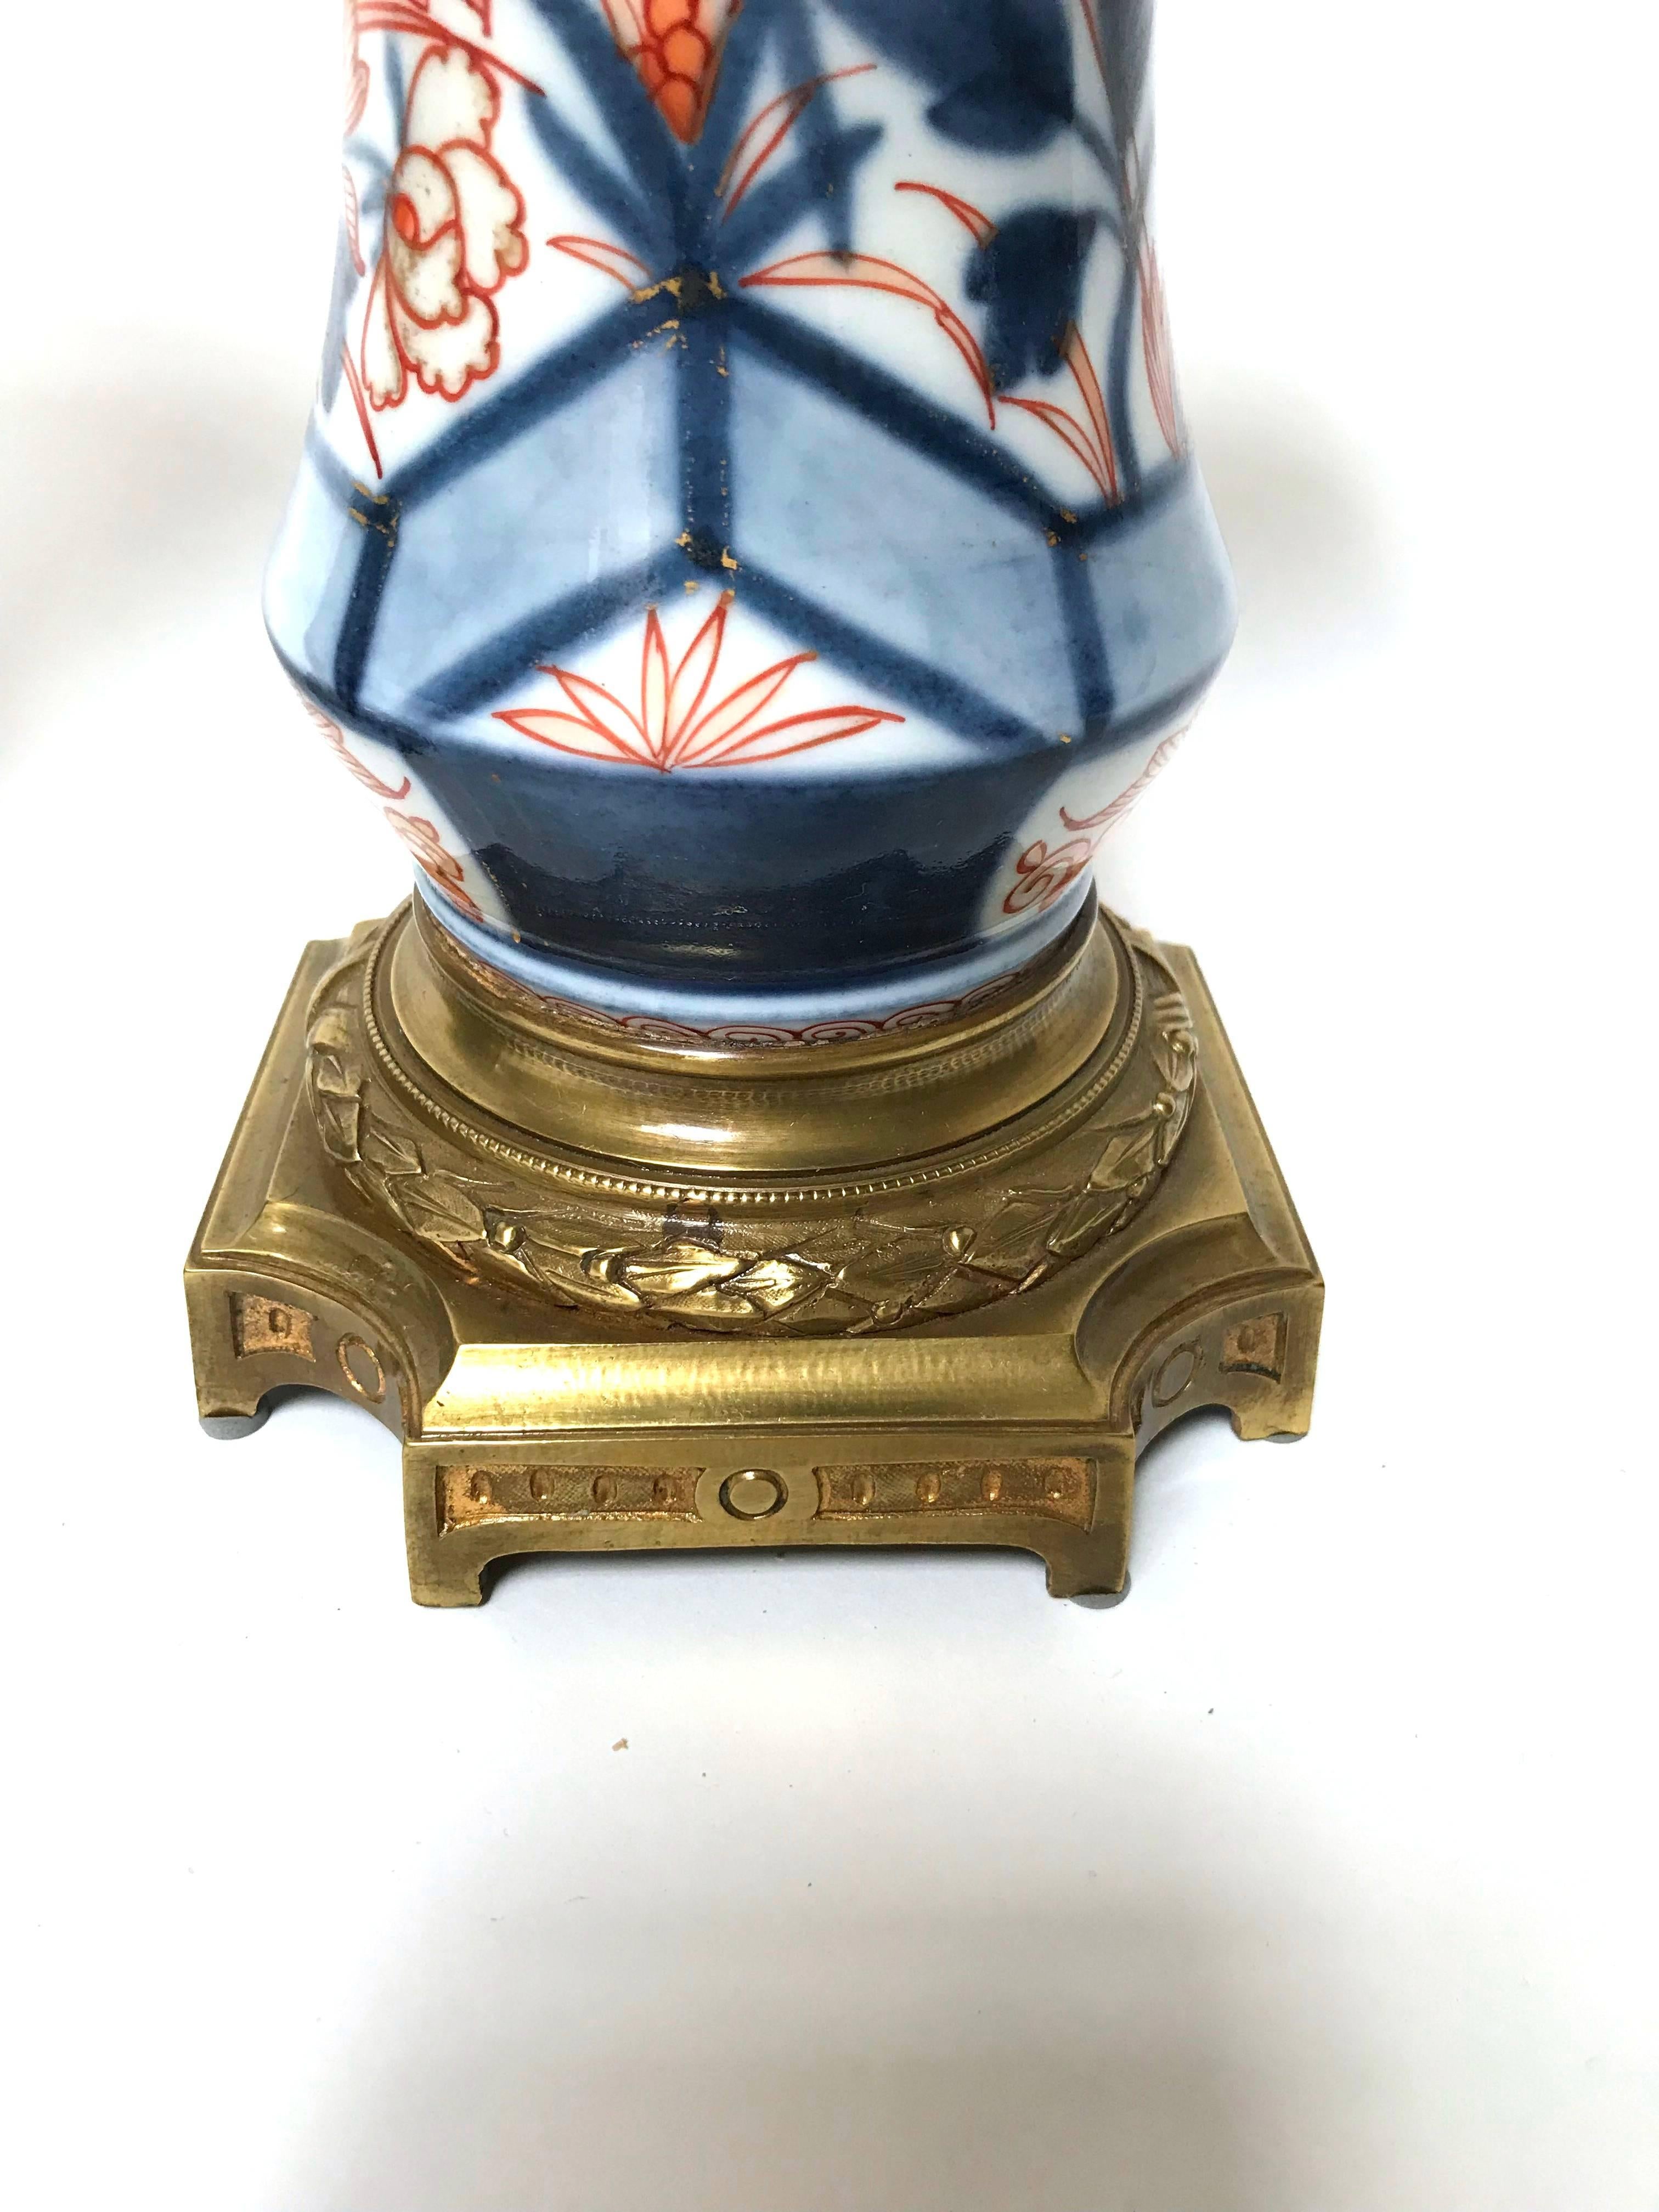 Pair of Early 19th Century Ormolu Mounted Japanese Imari Porcelain Vases In Good Condition For Sale In Dallas, TX